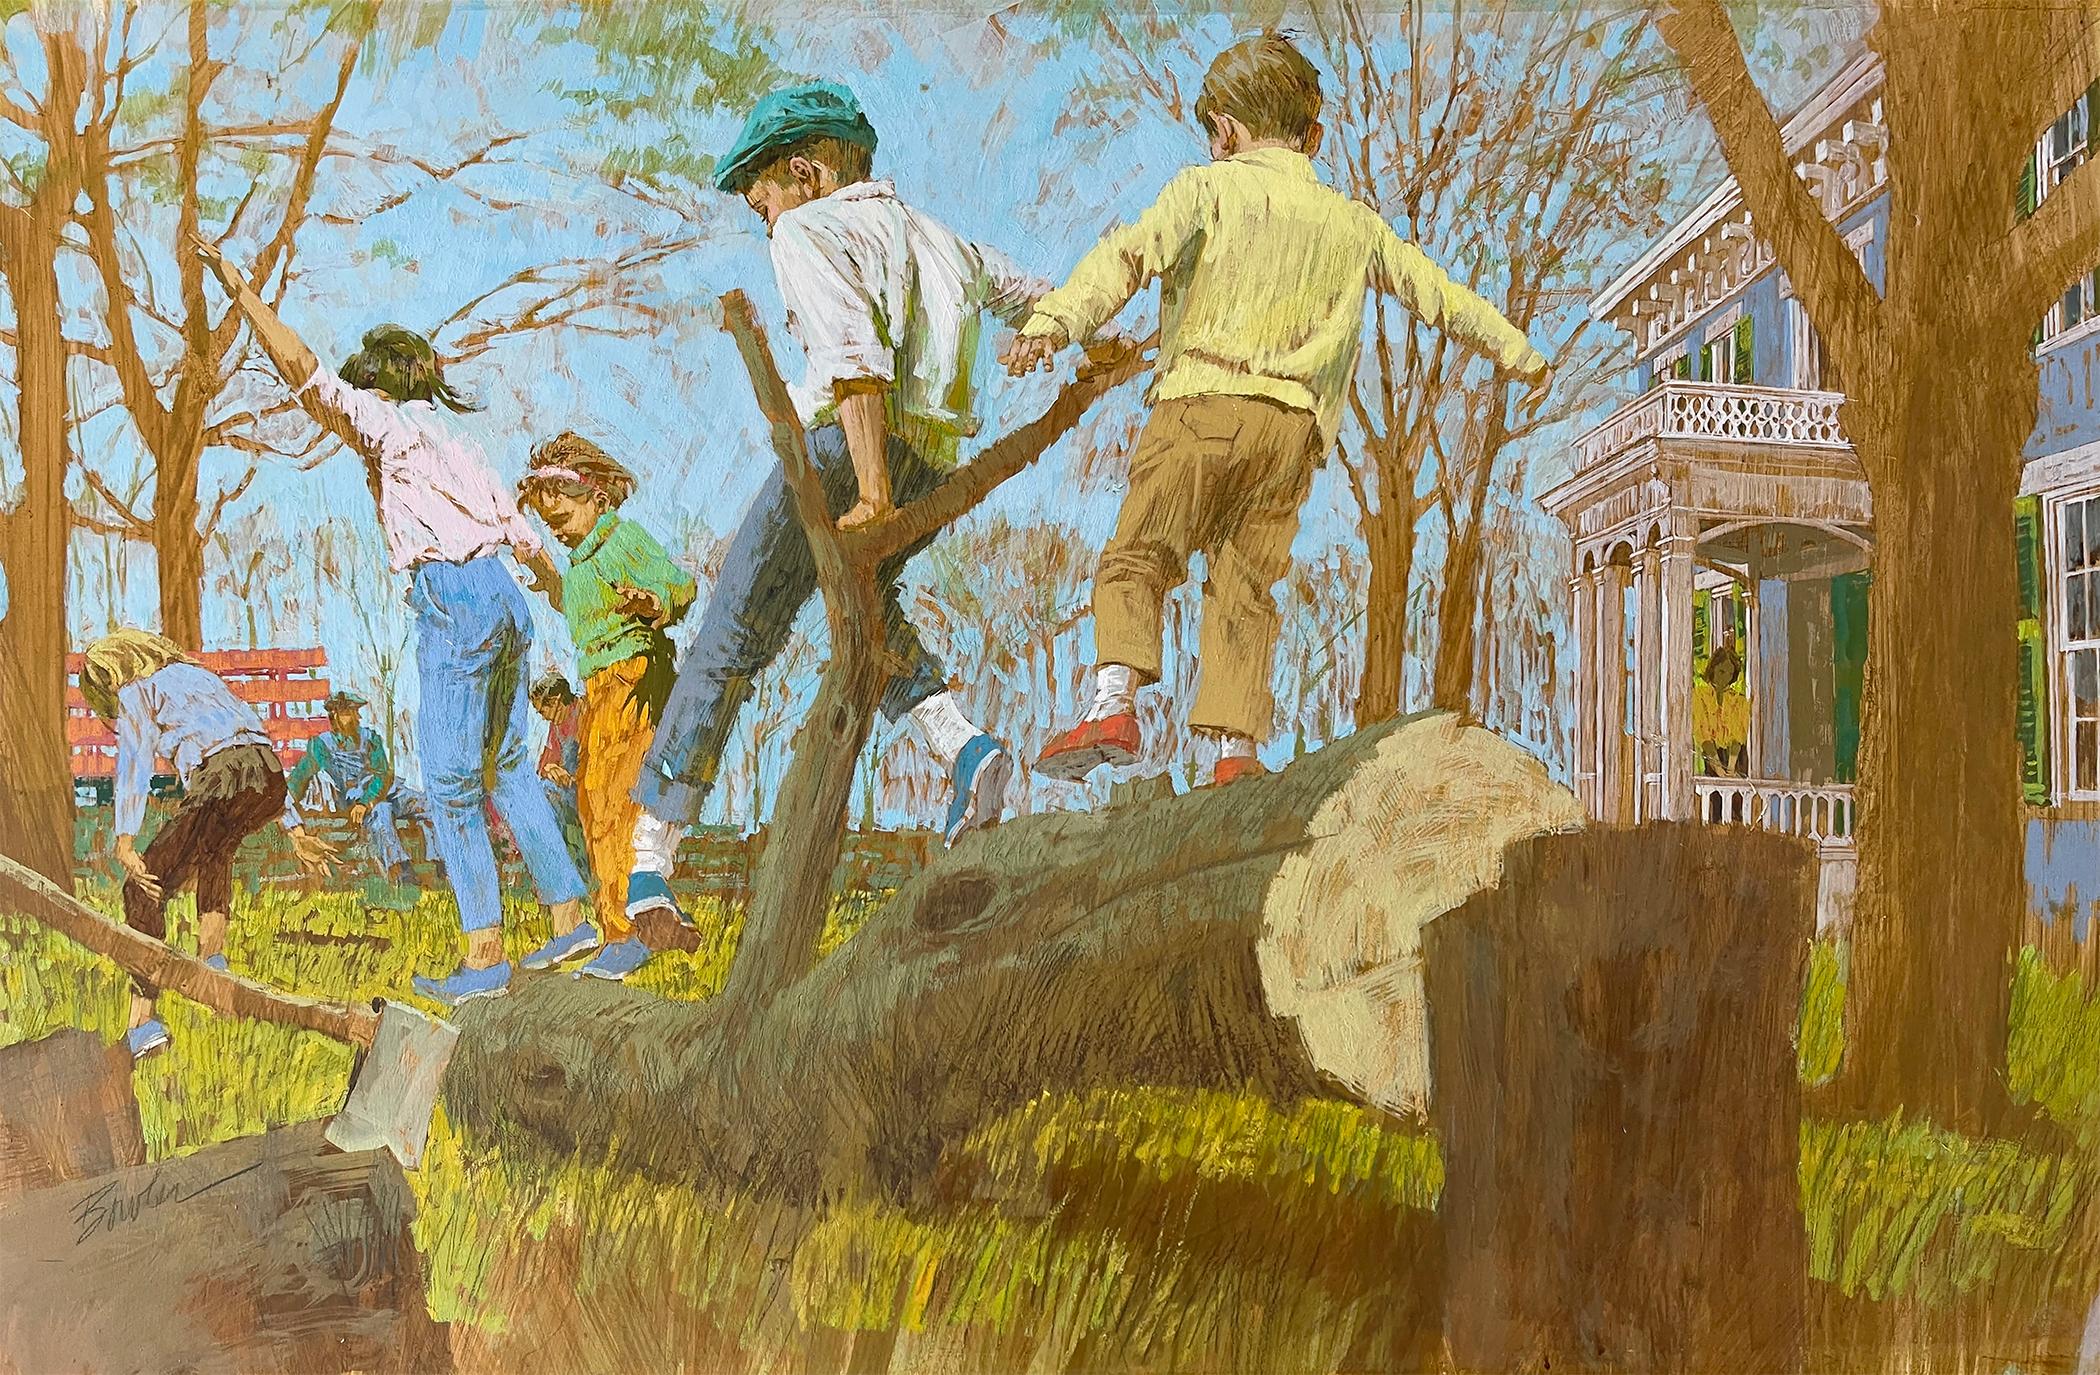 The Tree Cutters - Children Playing on a Fallen Tree - Saturday Evening Post? - Brown Figurative Painting by Joe Bowler